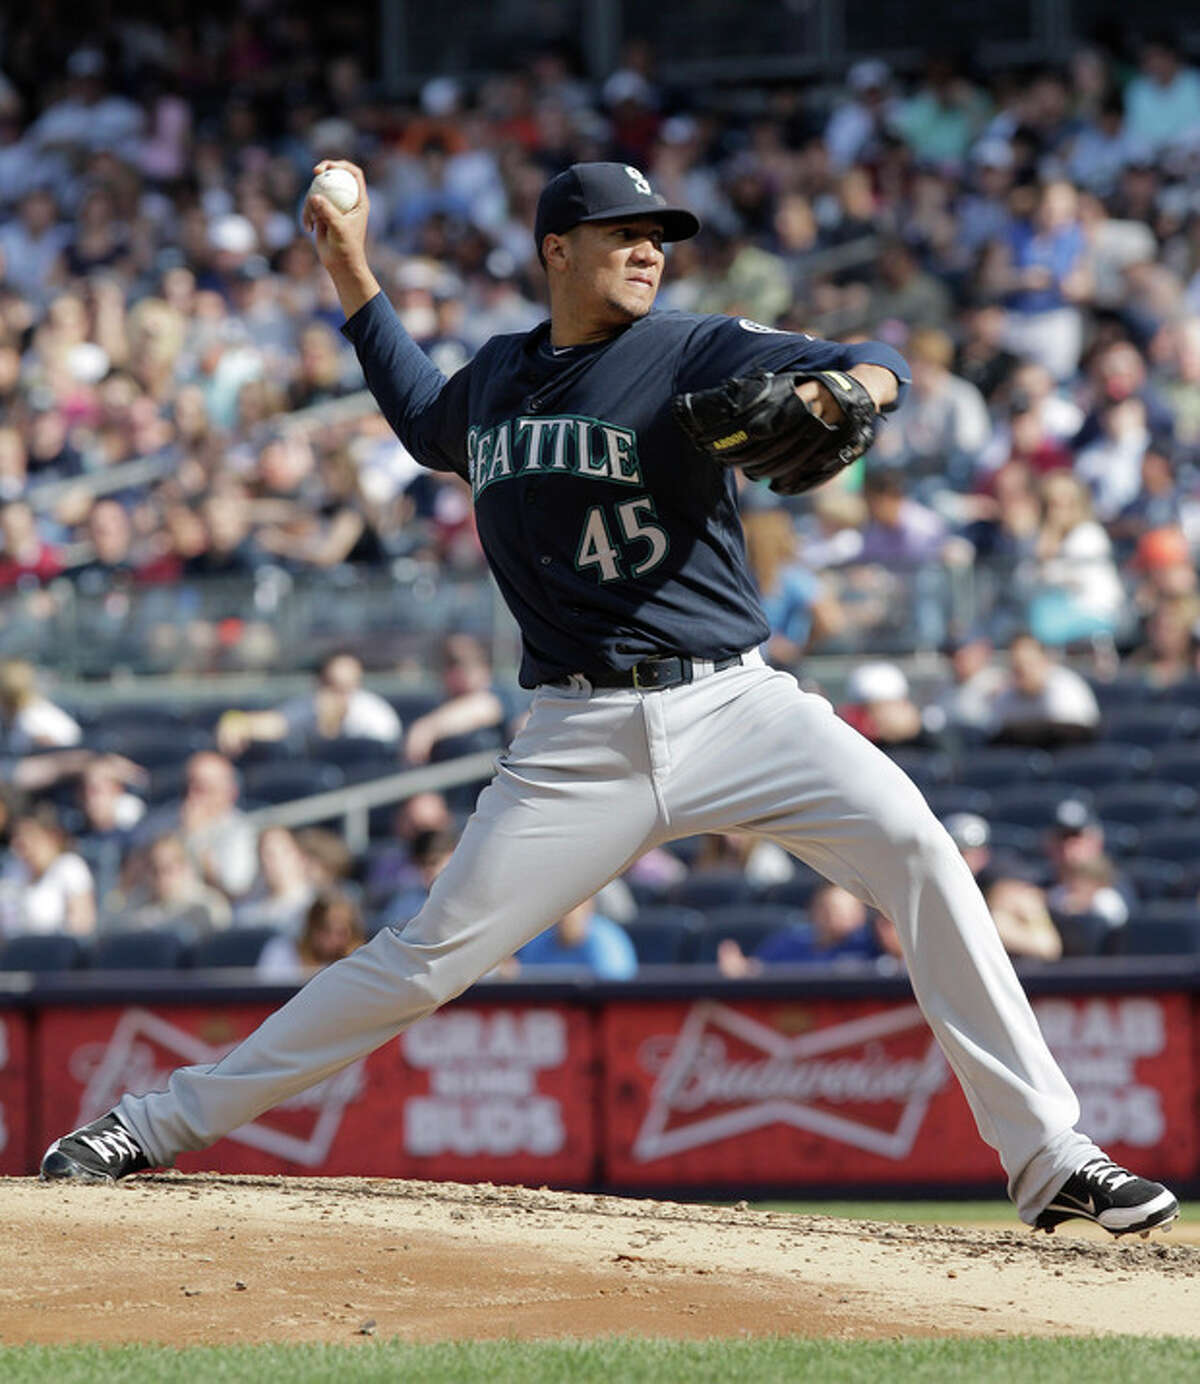 Seattle Mariners pitcher Hector Noesi throws in the third inning of a baseball game against the New York Yankees on Saturday, May 12, 2012 in New York. (AP PhotoPeter Morgan)